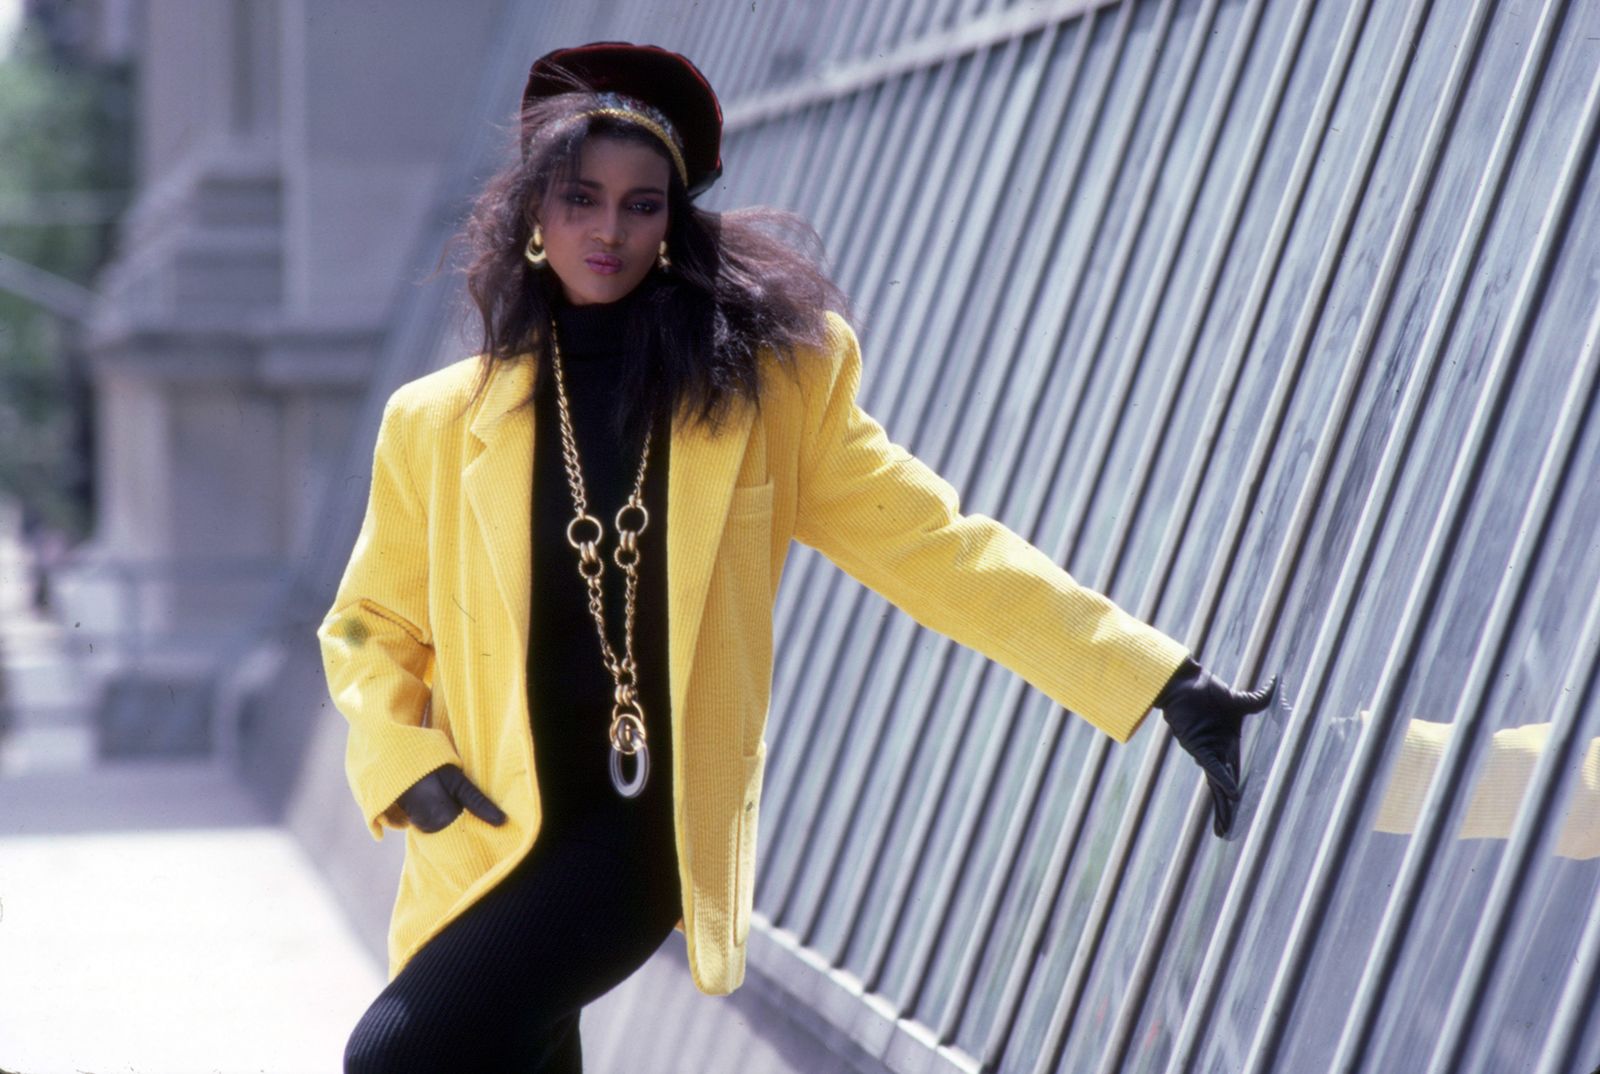 80s fashion makes comeback, serves to improve modern style, Opinion